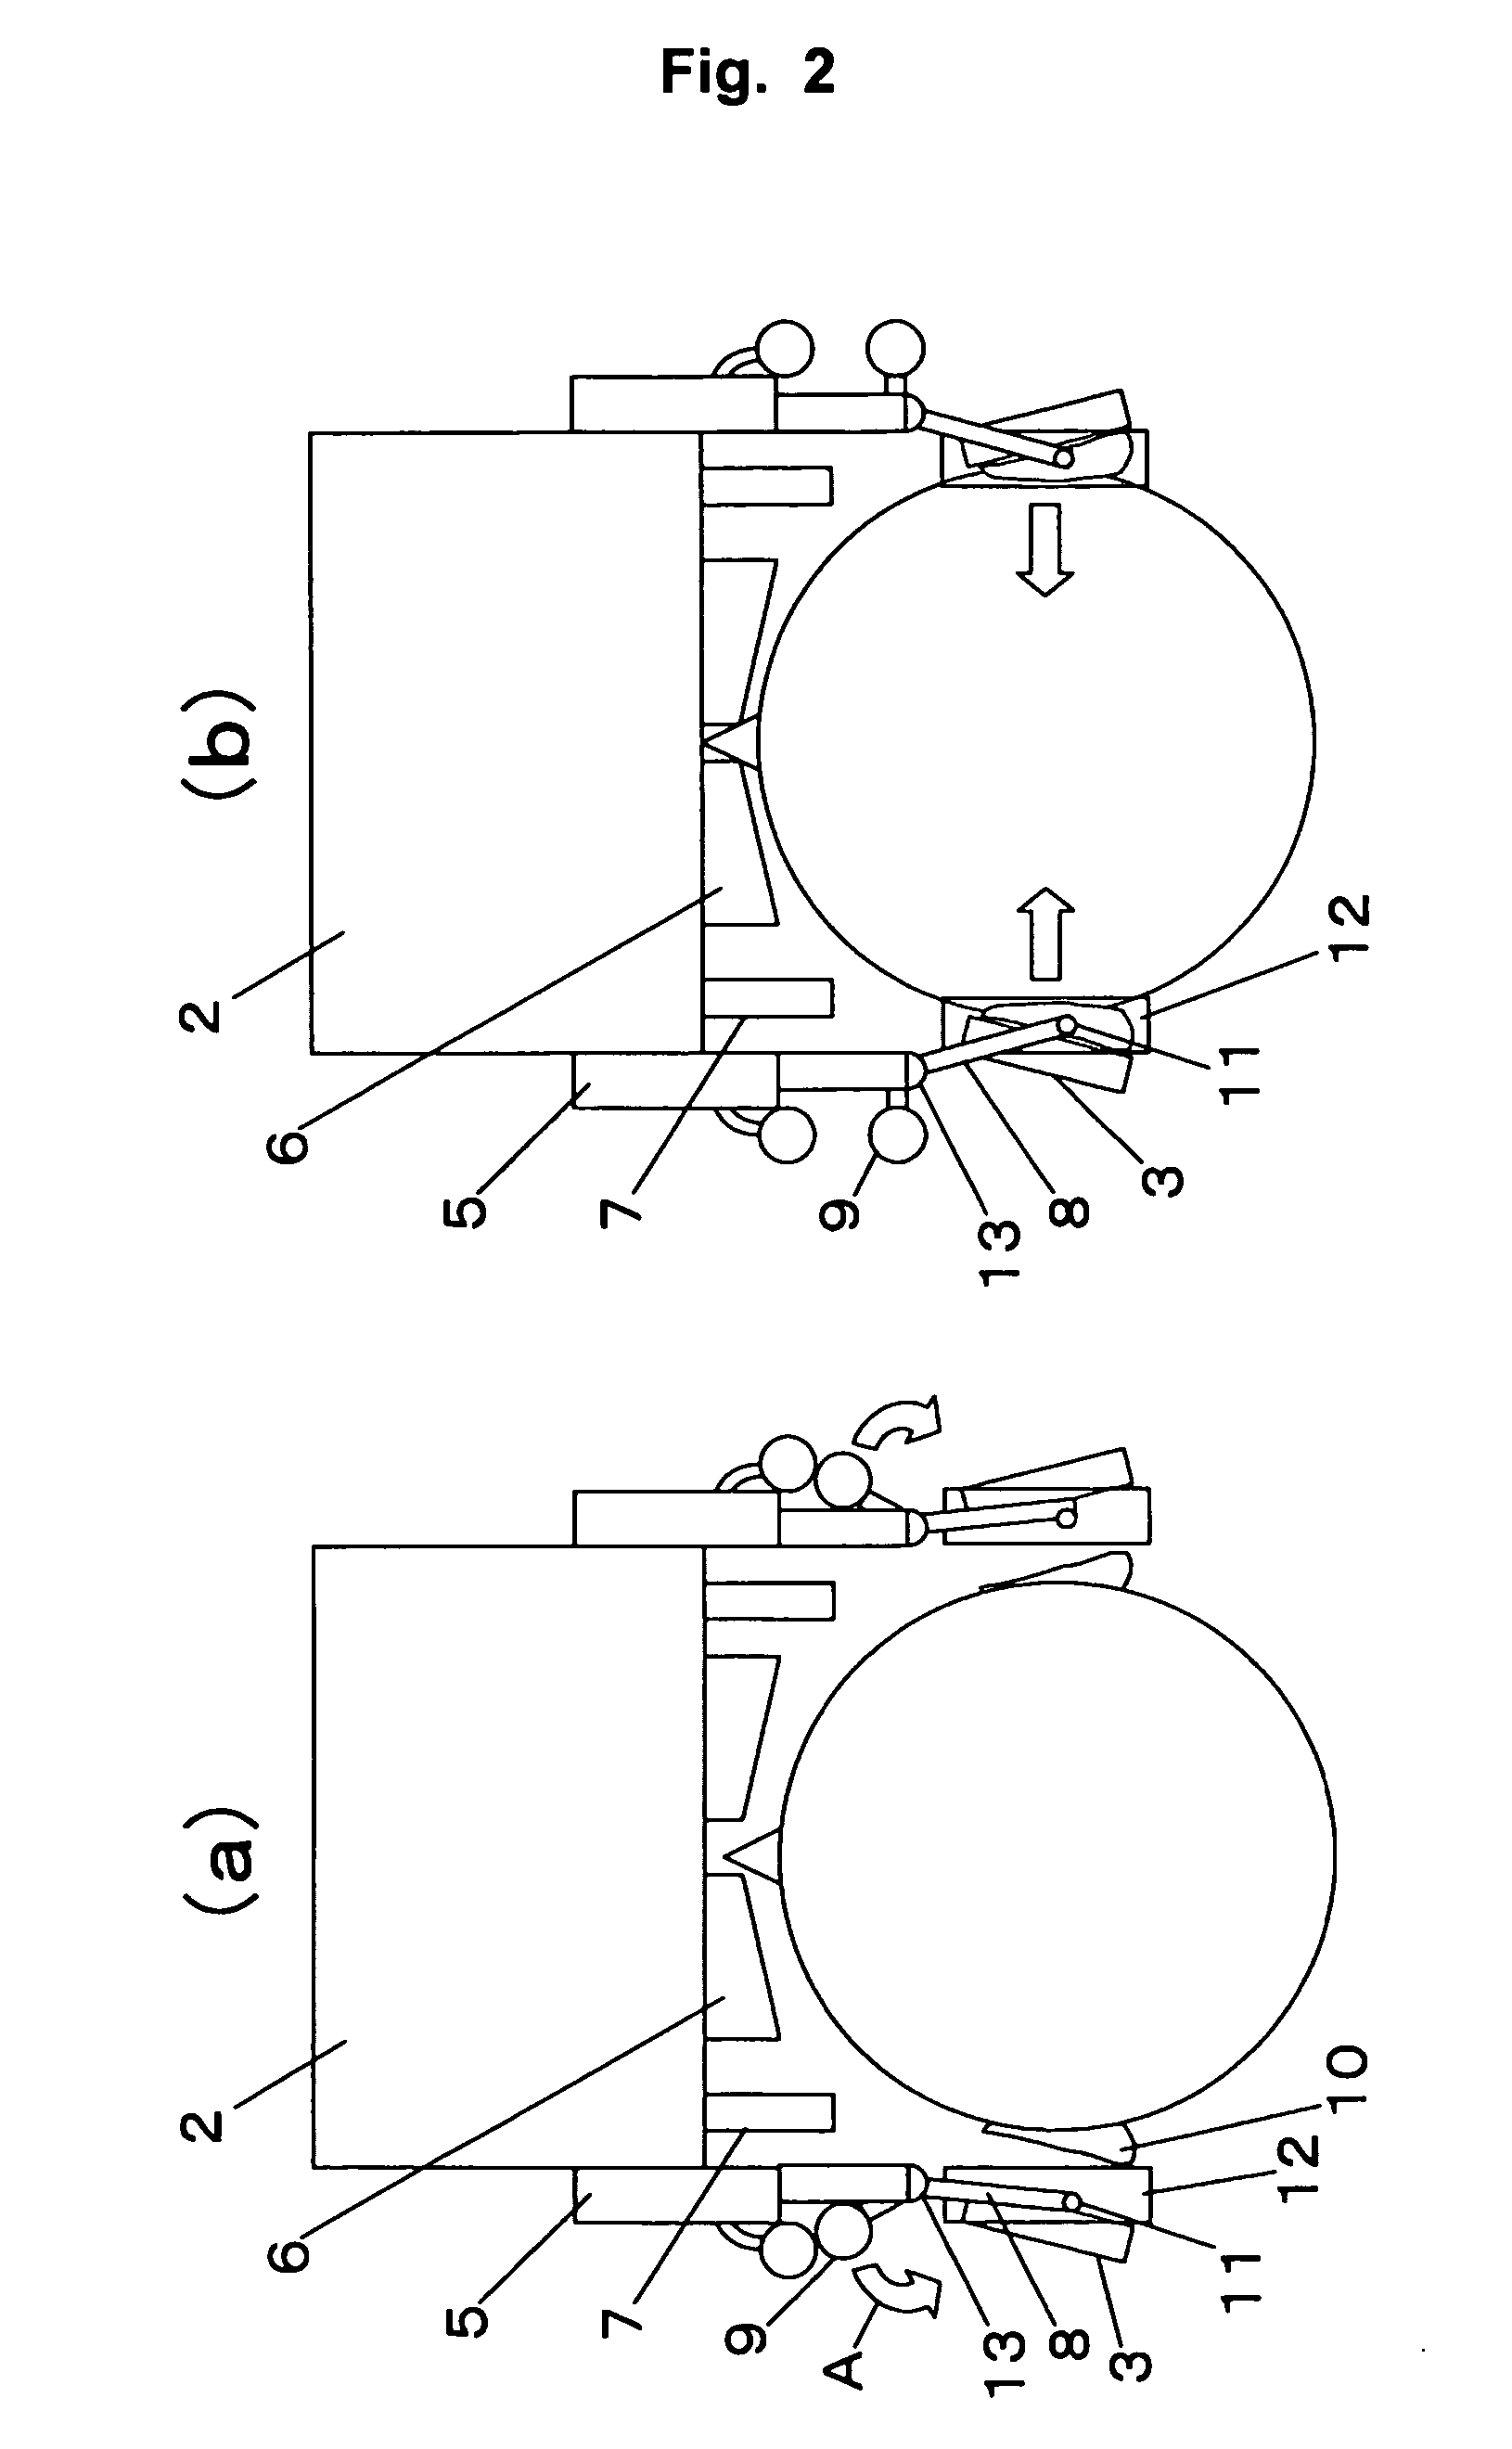 Image display device and image display system